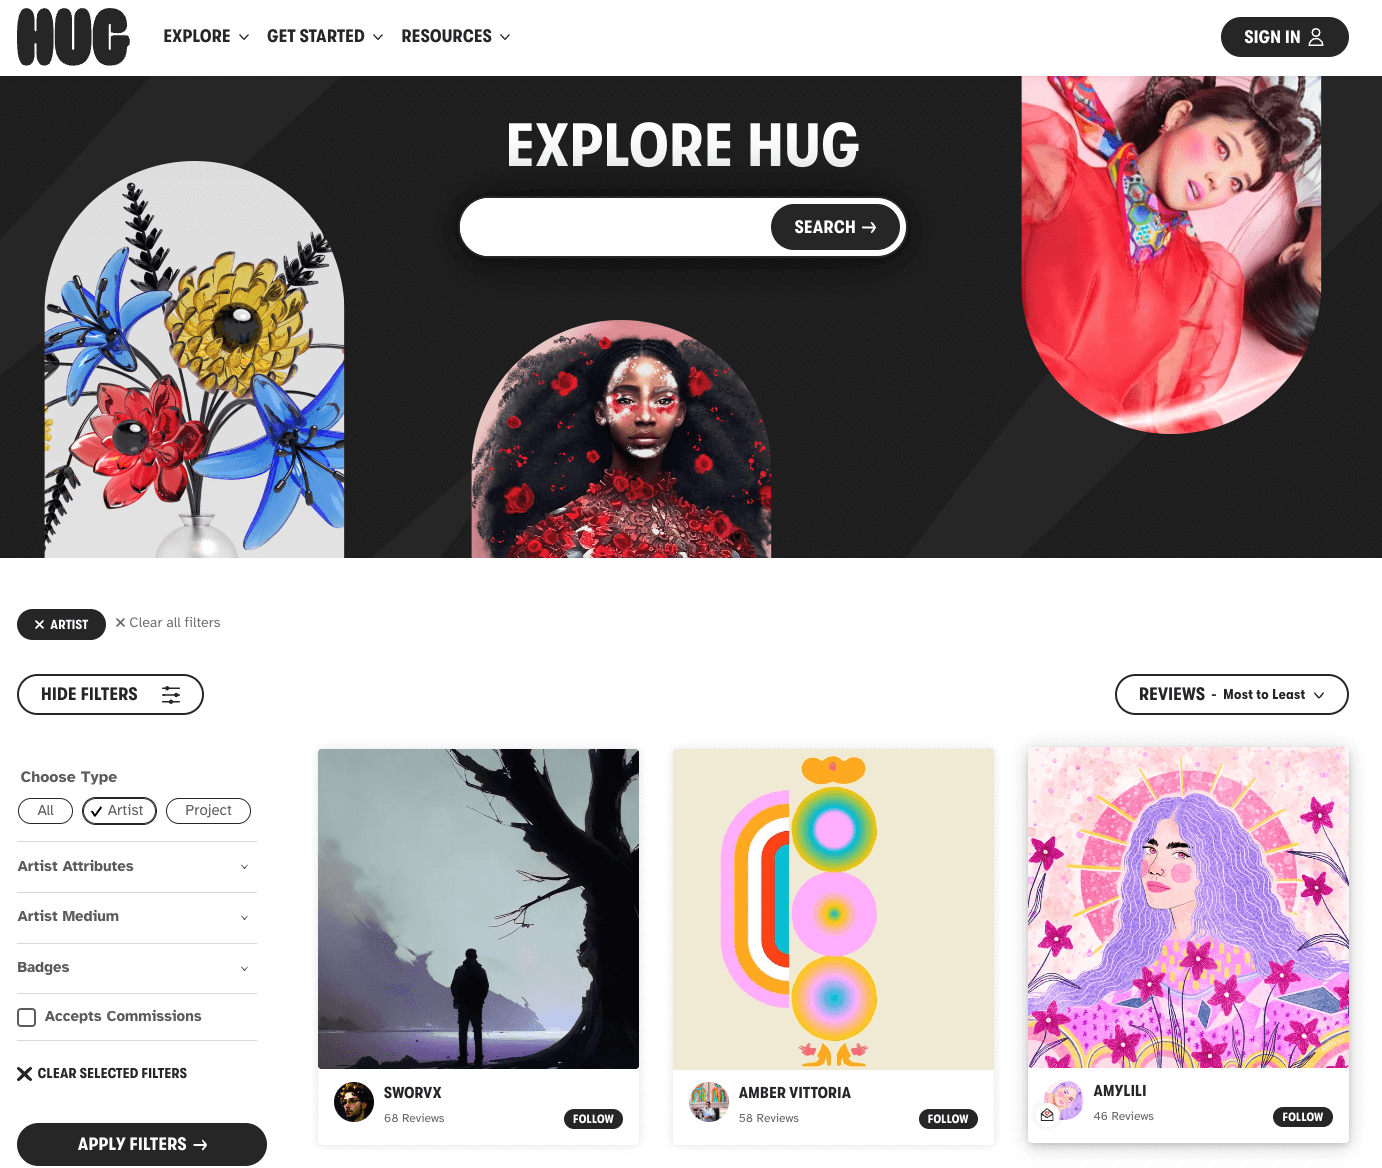 thehug-website-artist-profile-search-filters